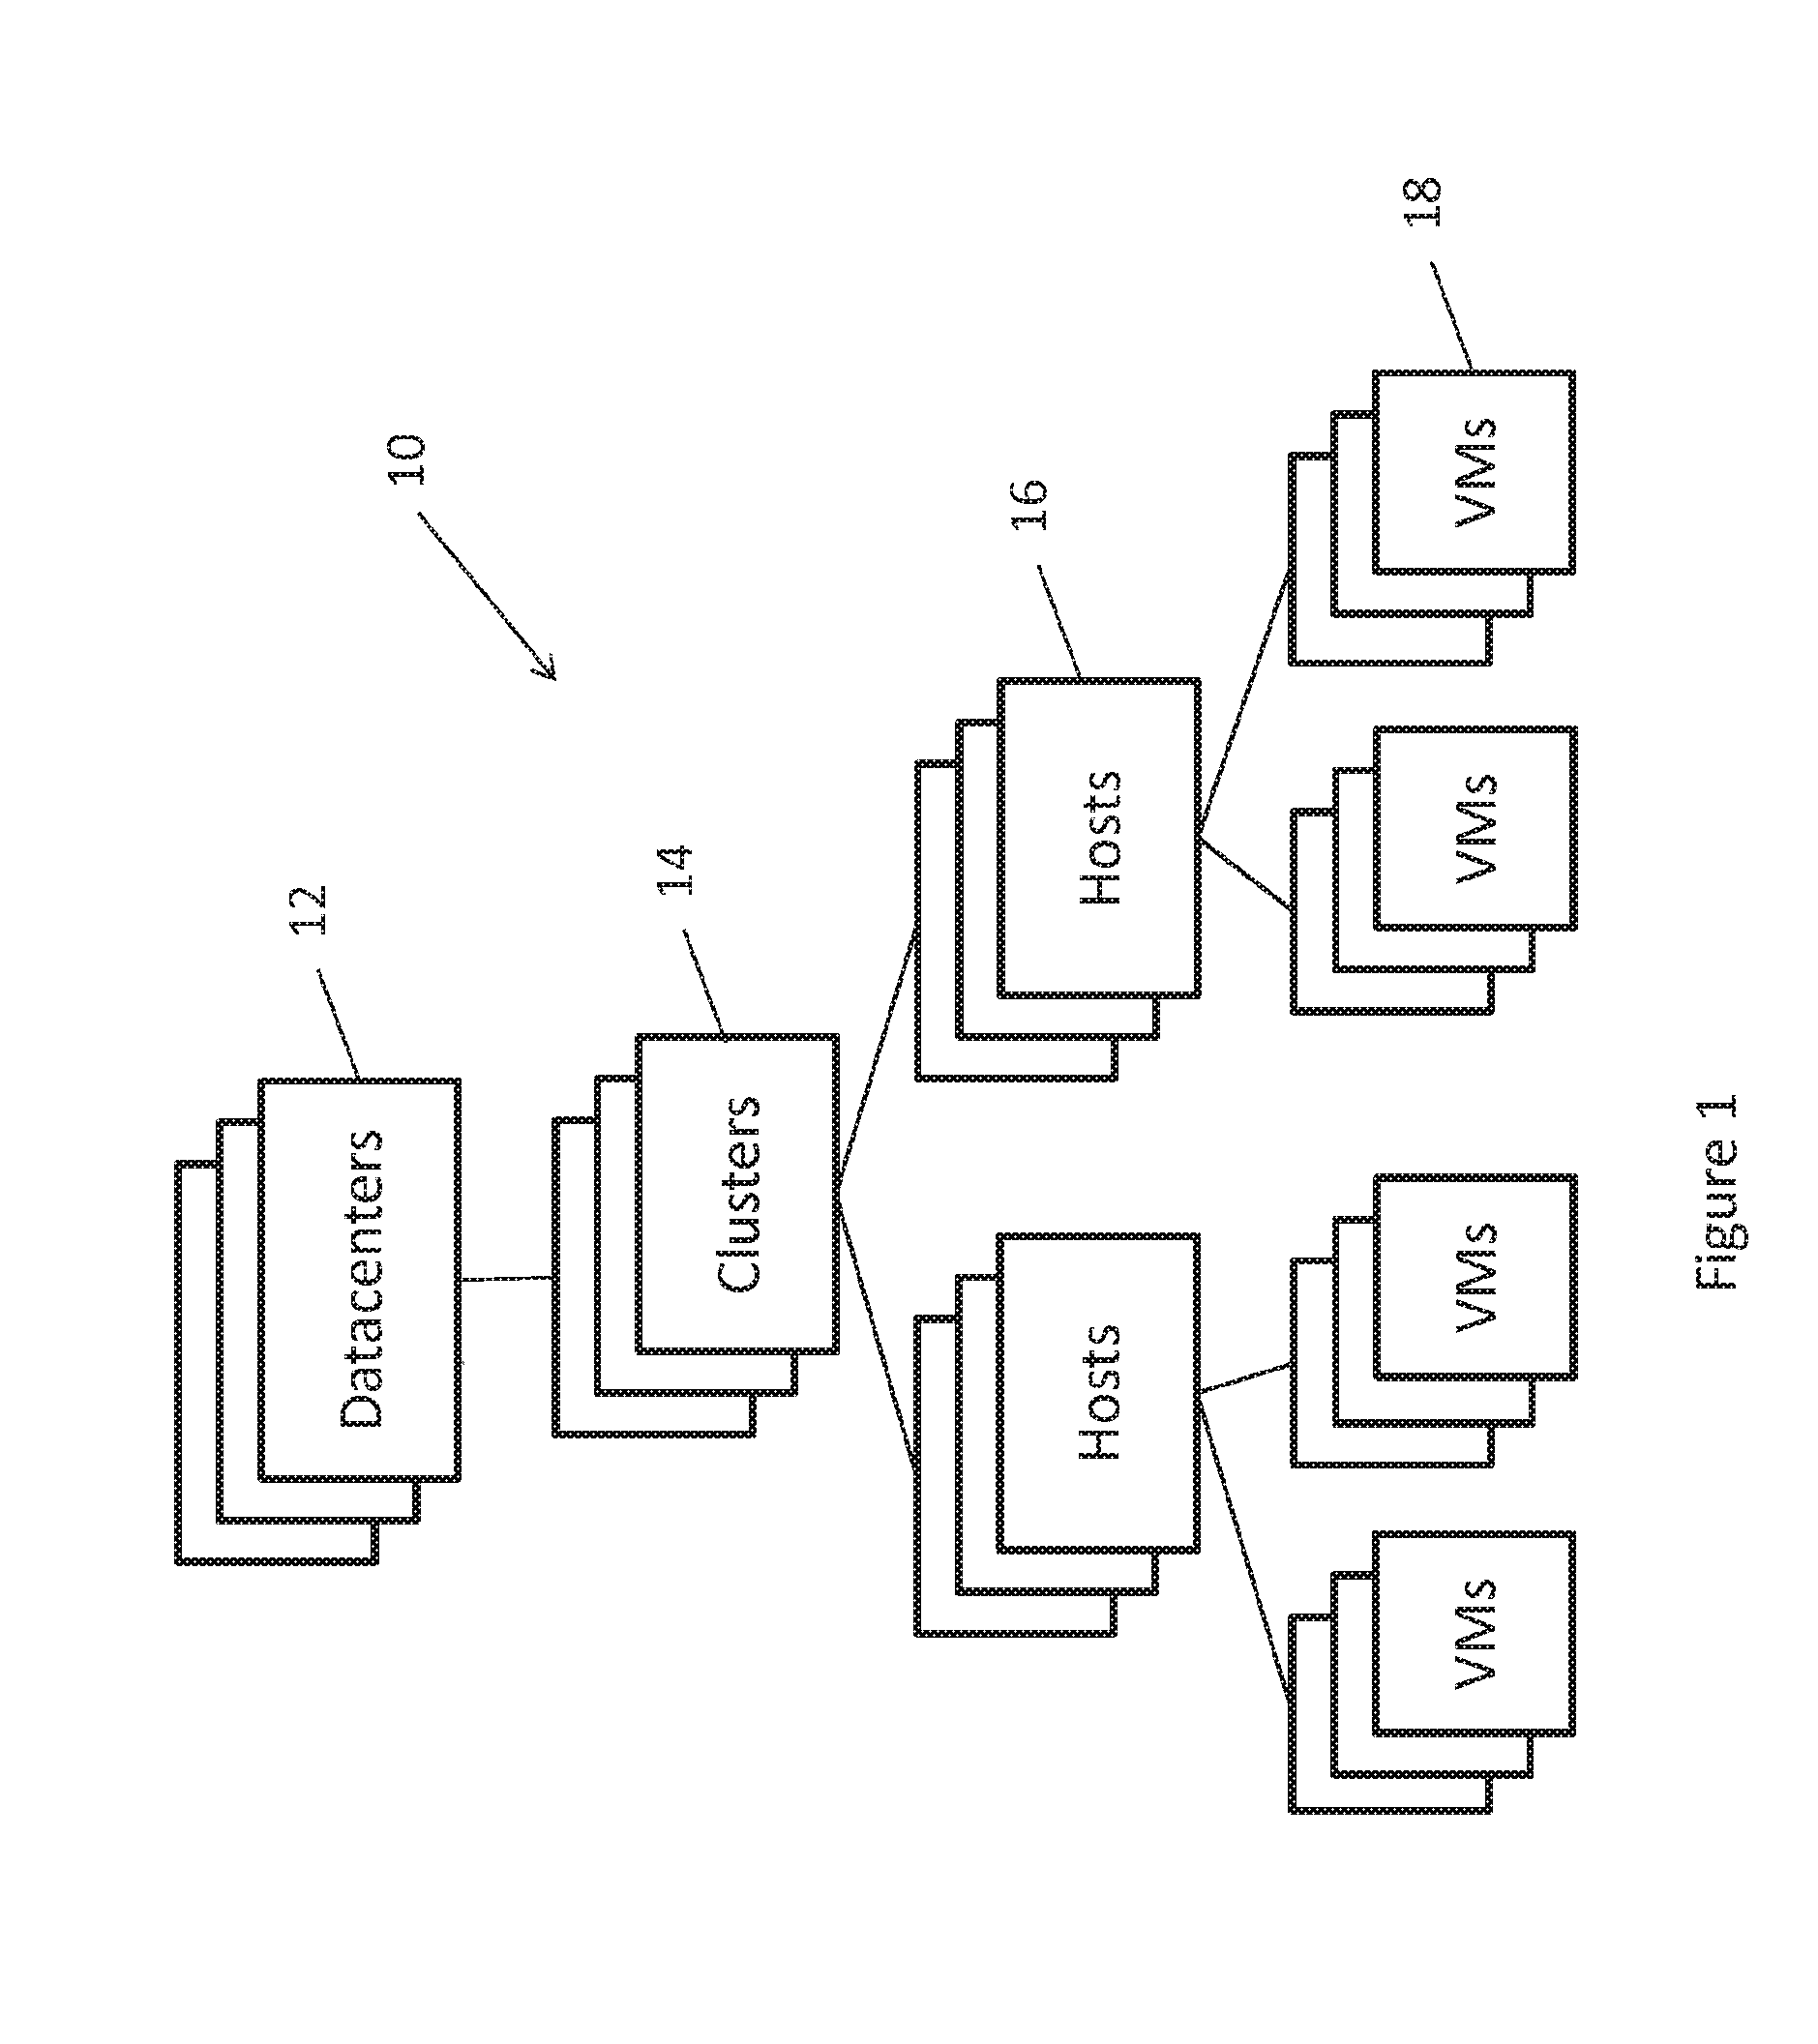 System and Method for Determining Capacity in Computer Environments Using Demand Profiles